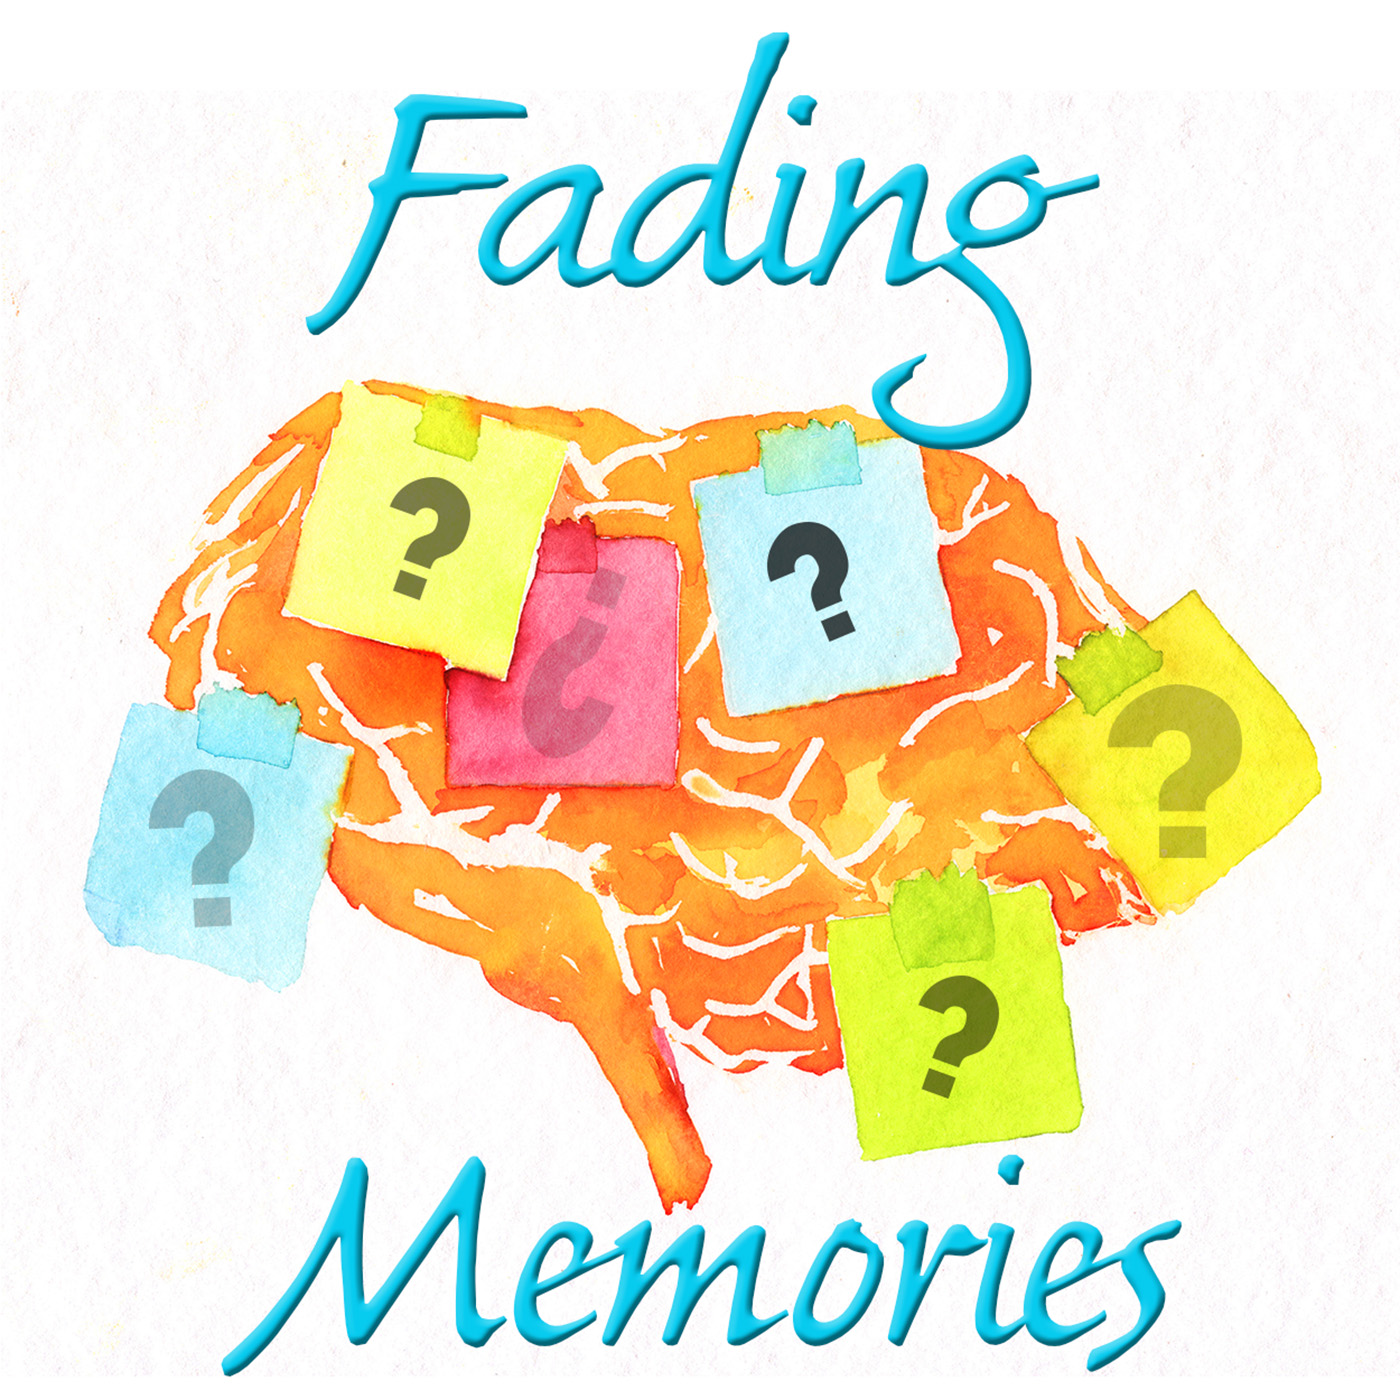 Fresh update on "last thursday" discussed on Fading Memories: Alzheimer's Caregiver Support